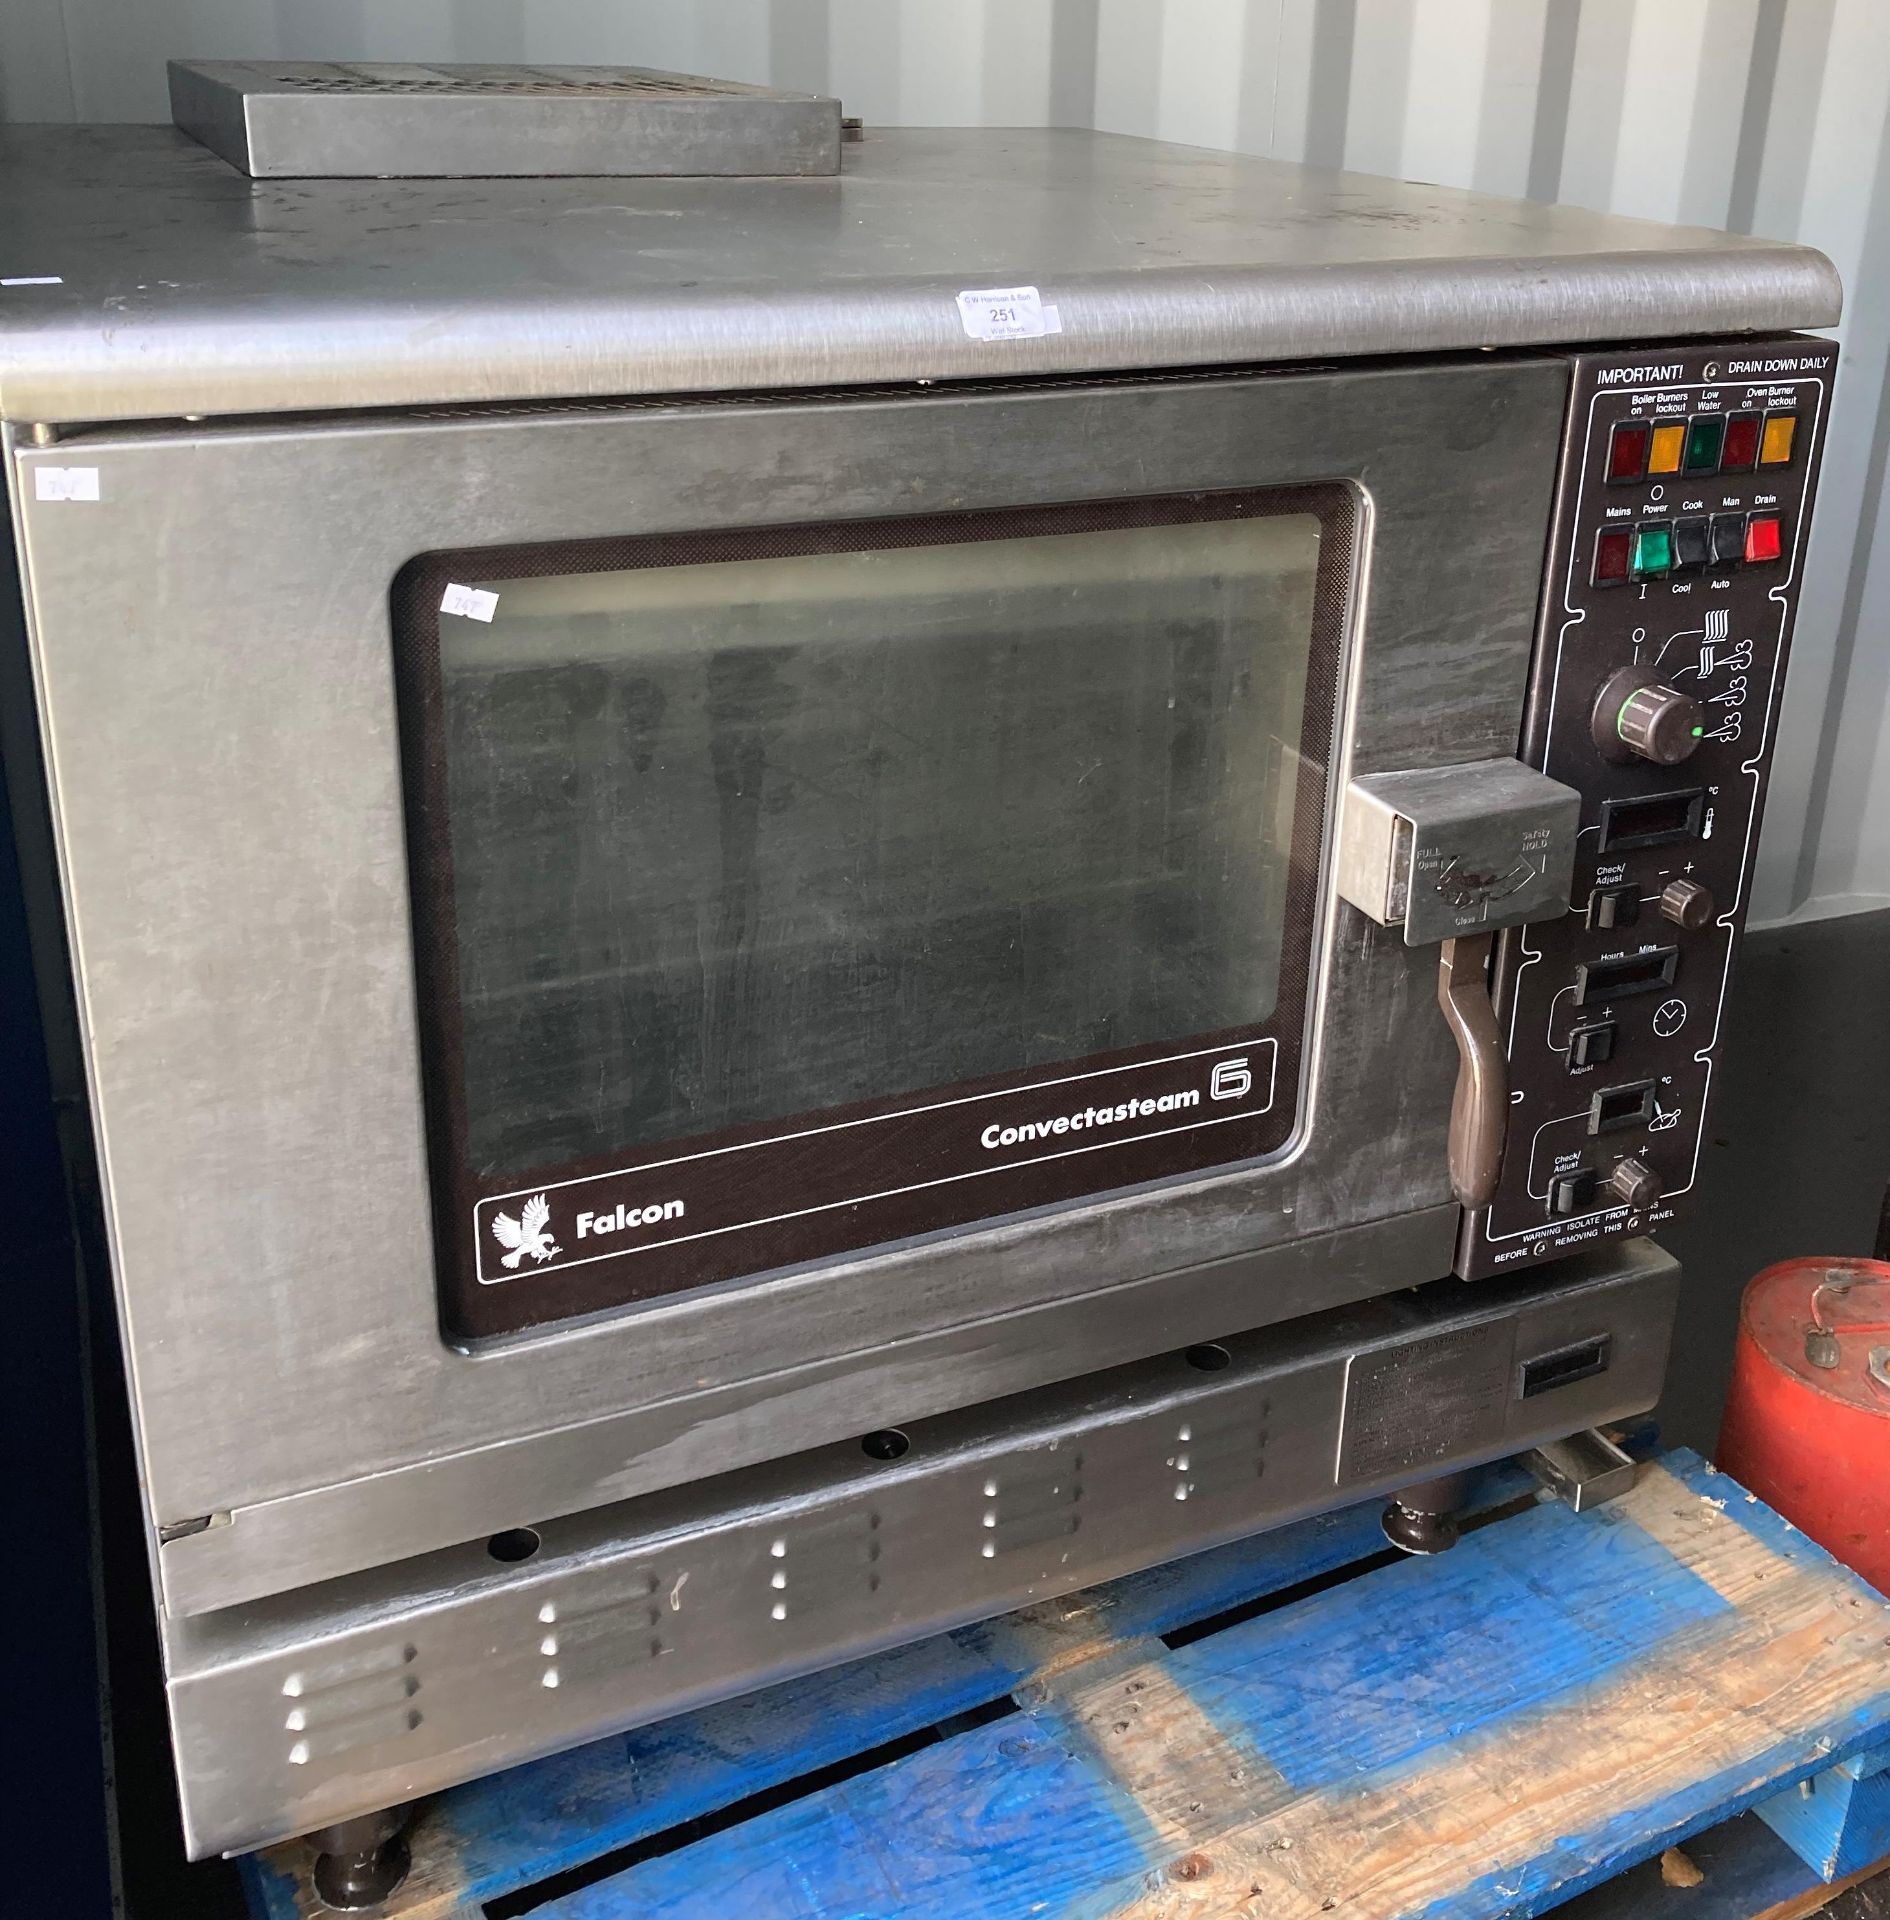 A Falcon Convectastream 6 stainless steel catering gas oven (in container)